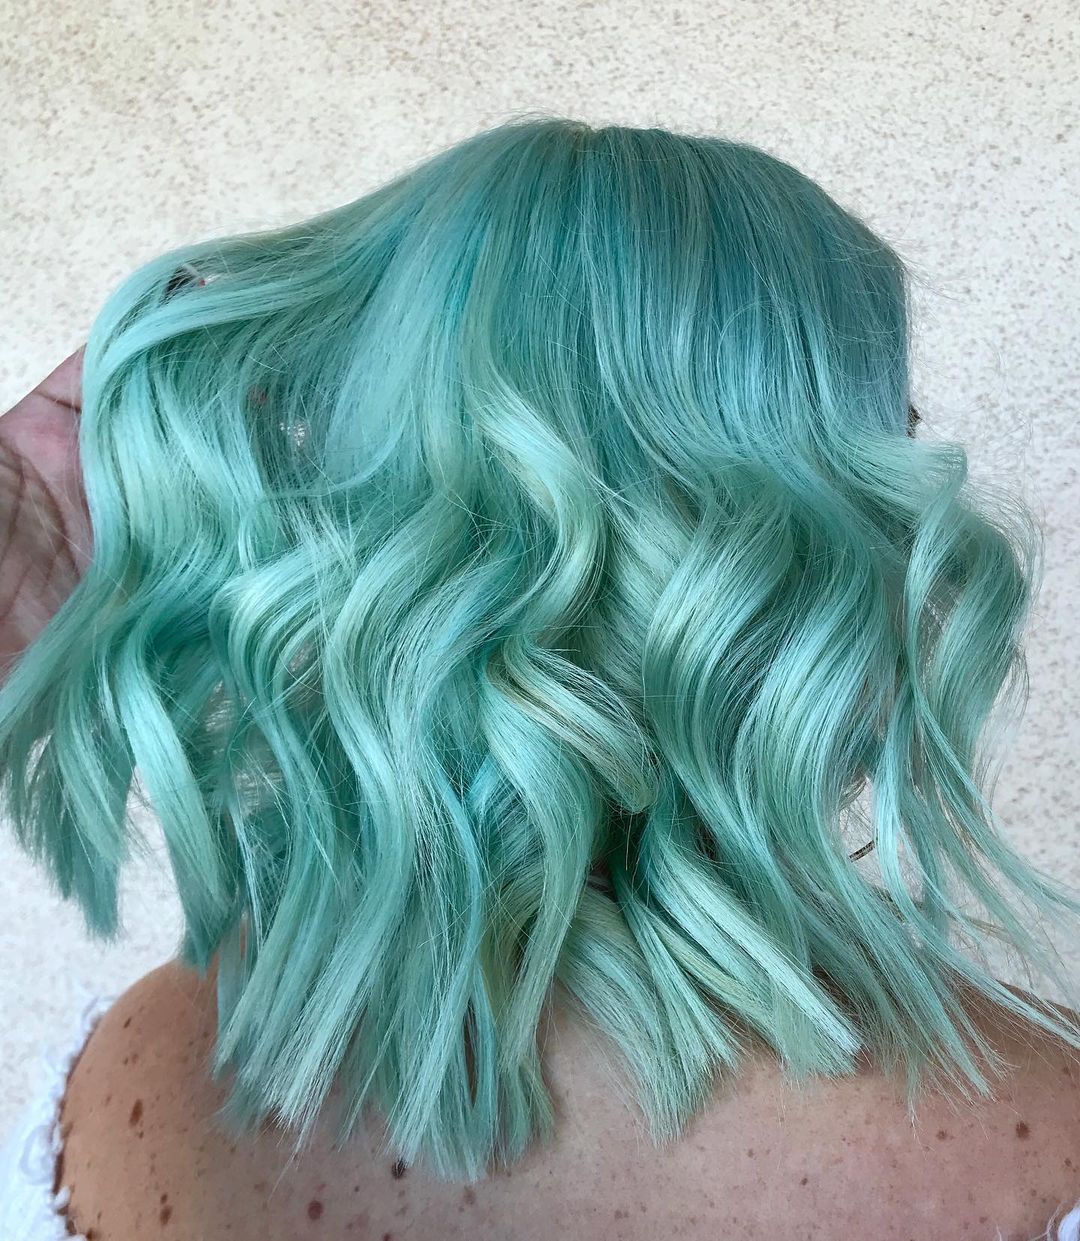 Turquoise and blonde hair